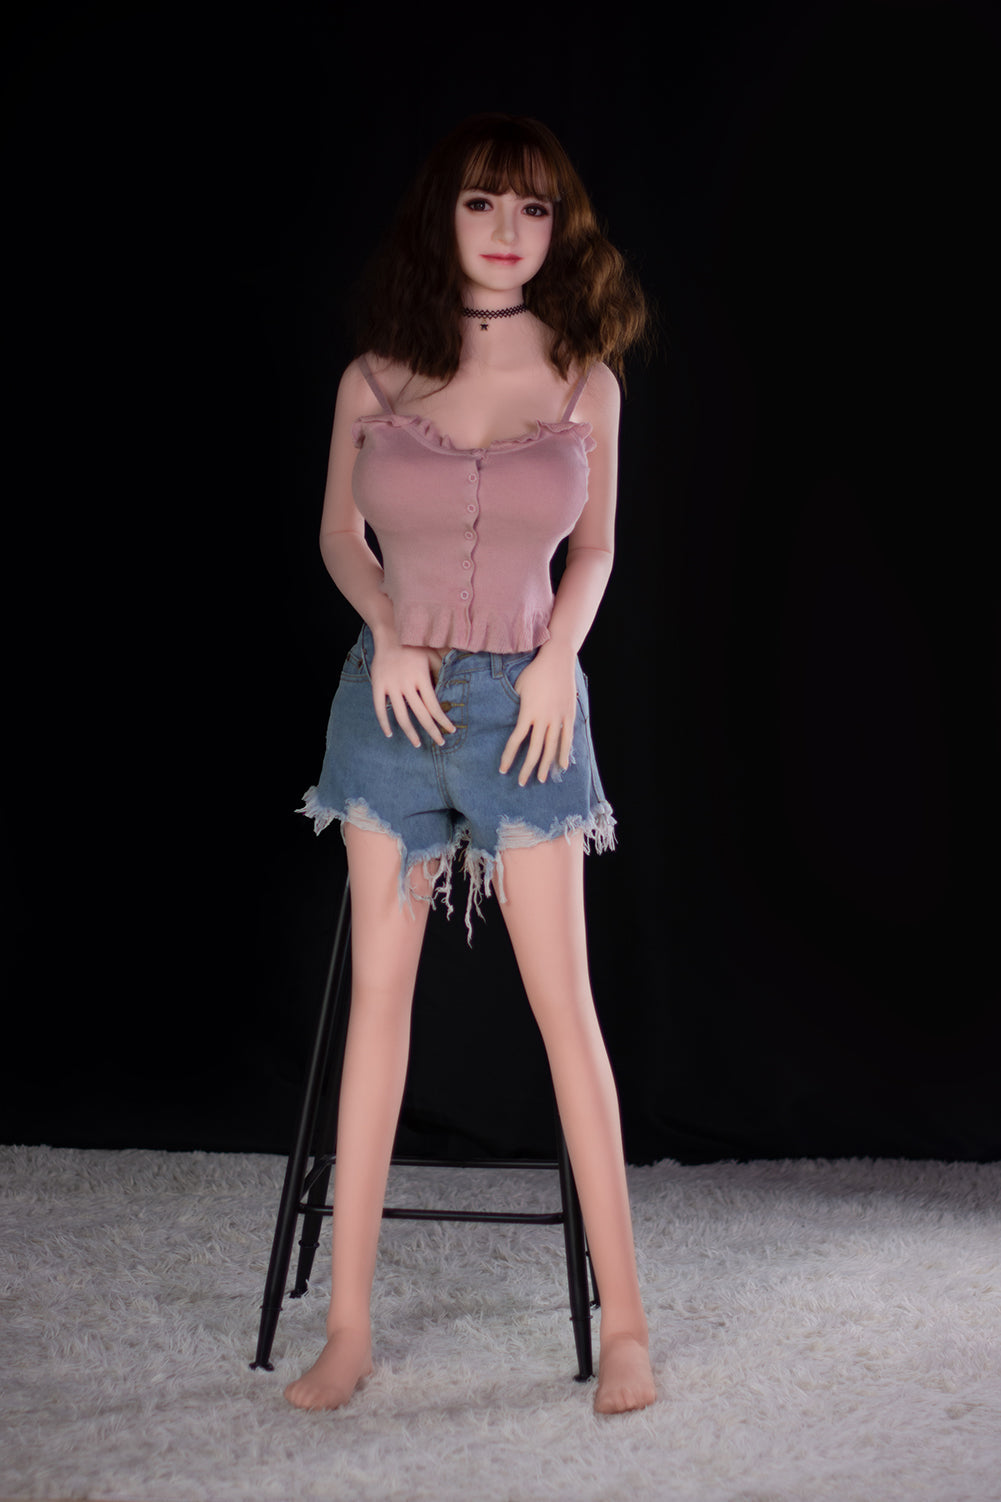 SY DOLL 158 CM D TPE - Harriet (USA) | Buy Sex Dolls at DOLLS ACTUALLY